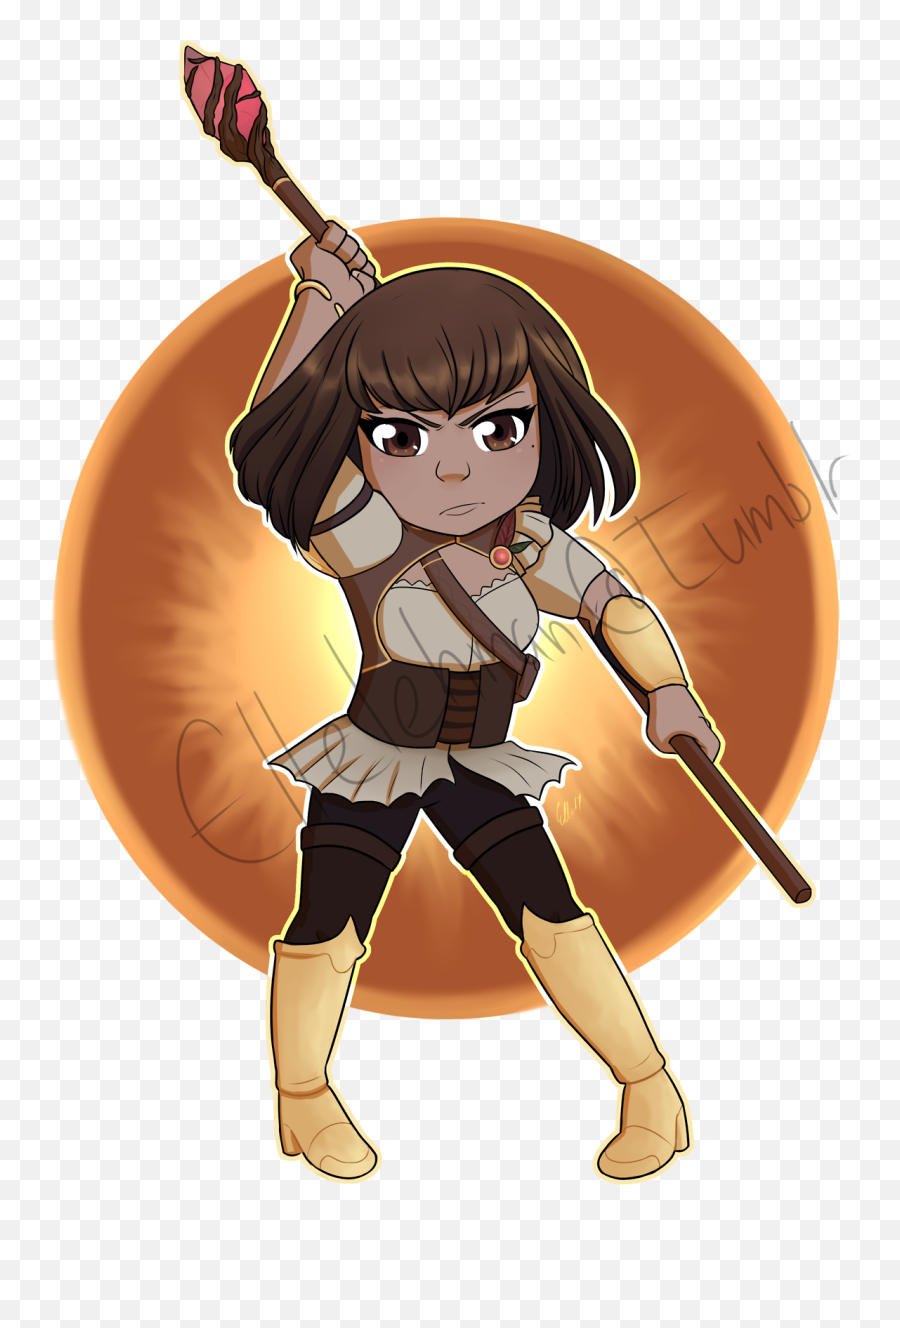 Transparent Chibi Commission Of Amber From Rwby - Fictional Character Png,Chibi Transparent